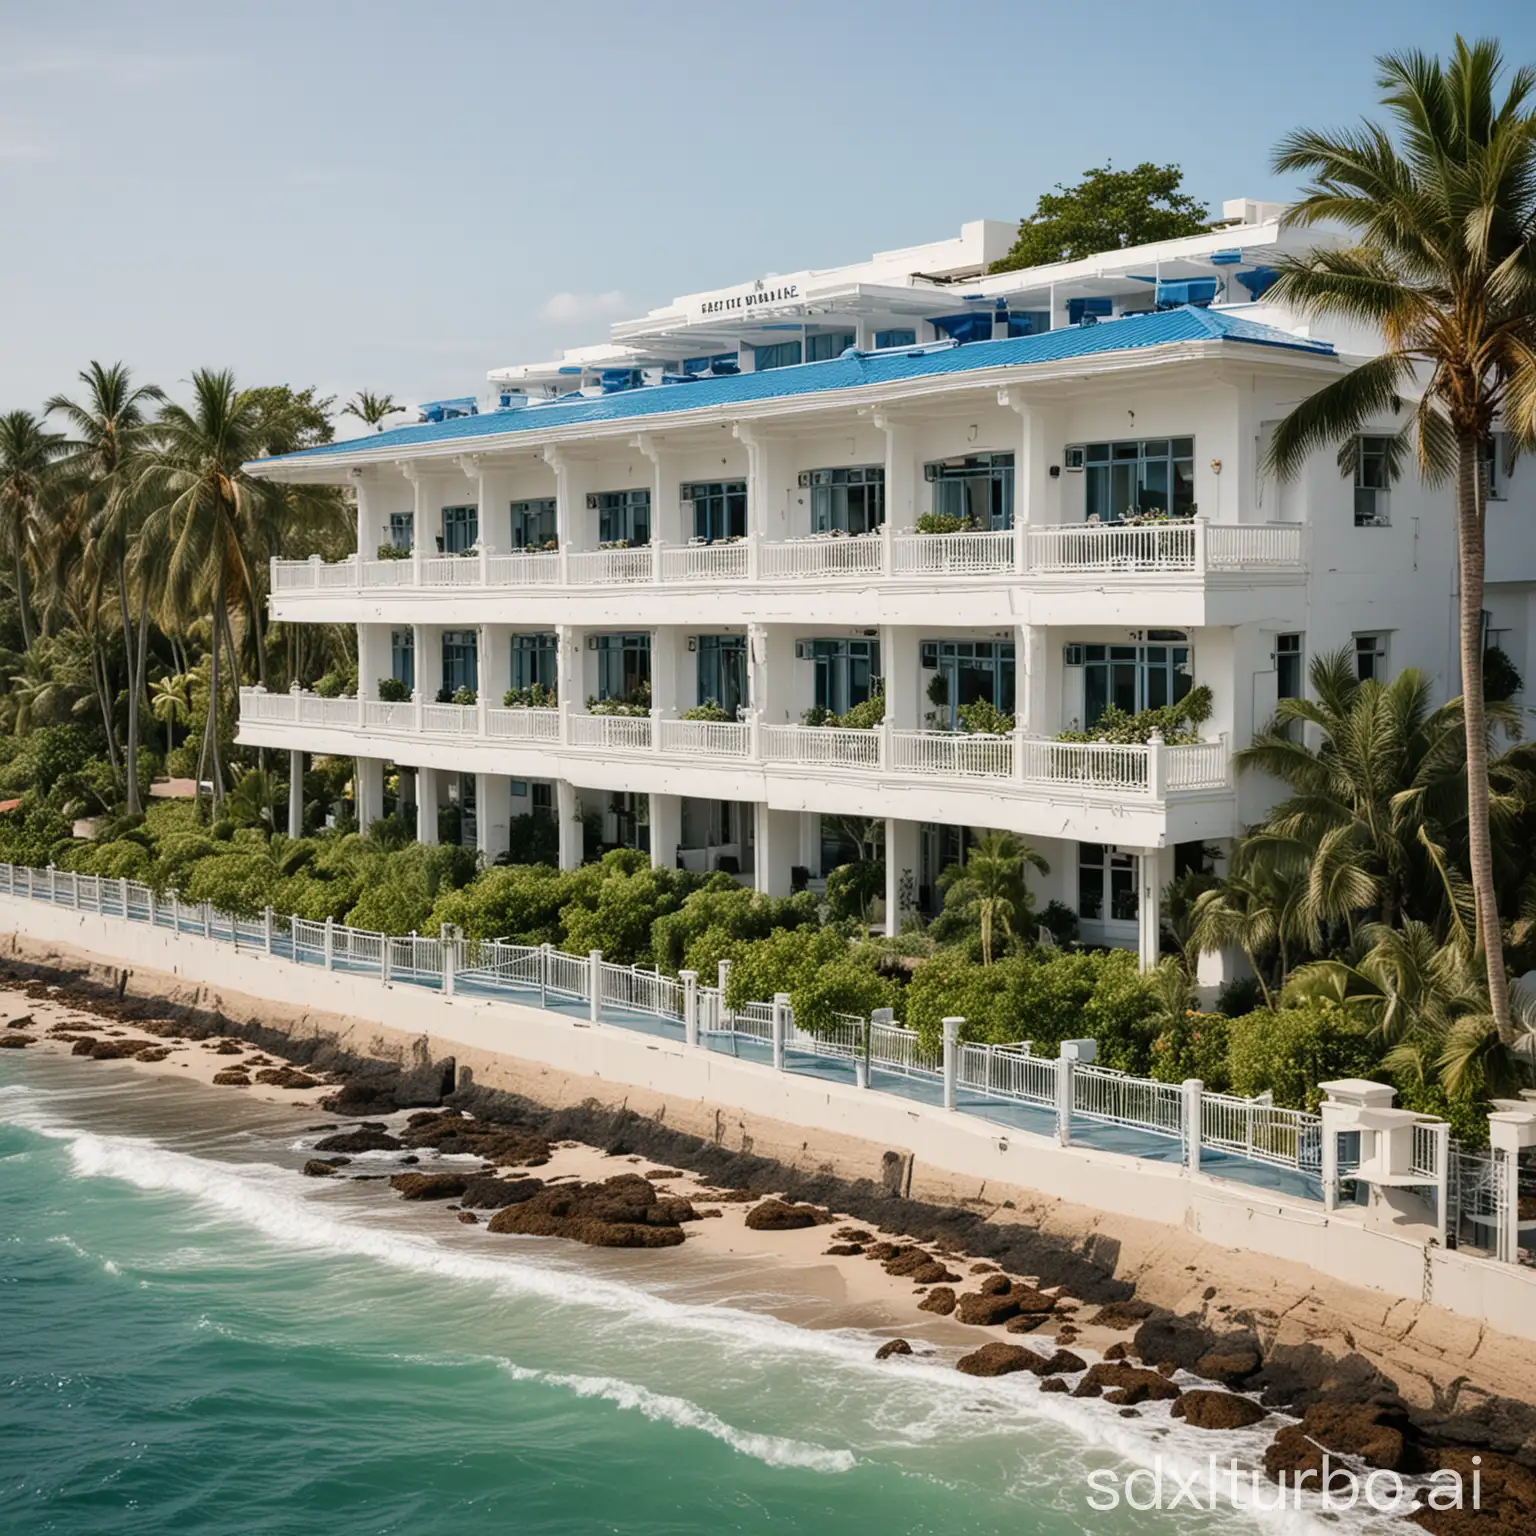 Luxurious-Oceanfront-Hotel-Surrounded-by-Palm-Trees